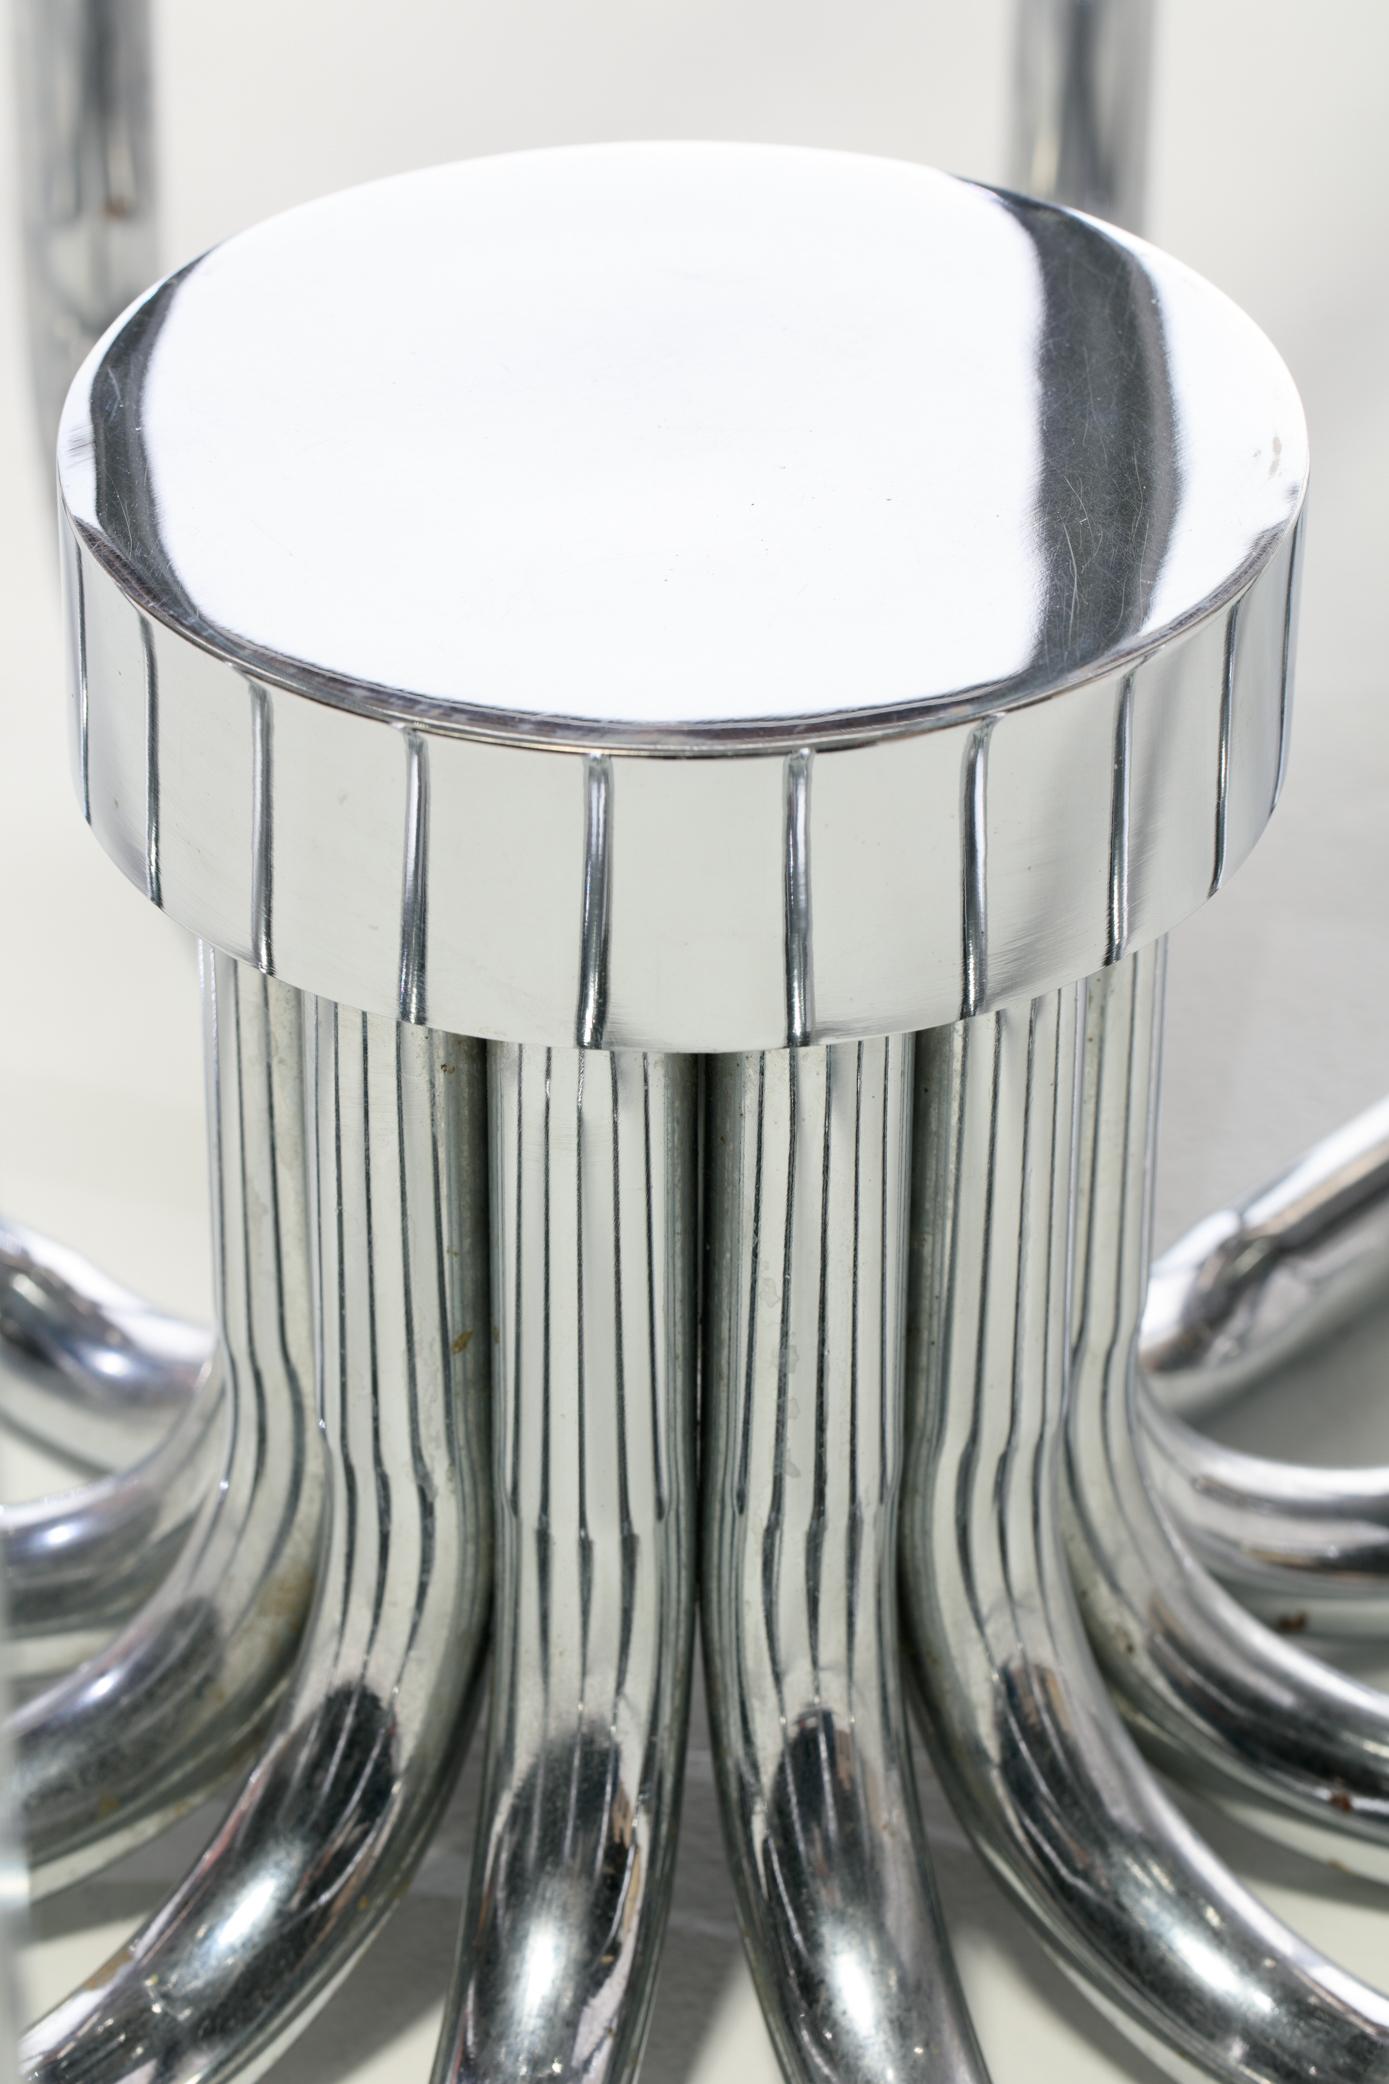 1970s Sculptural Chrome Dining Or Center Table In Good Condition For Sale In Saint Louis, MO